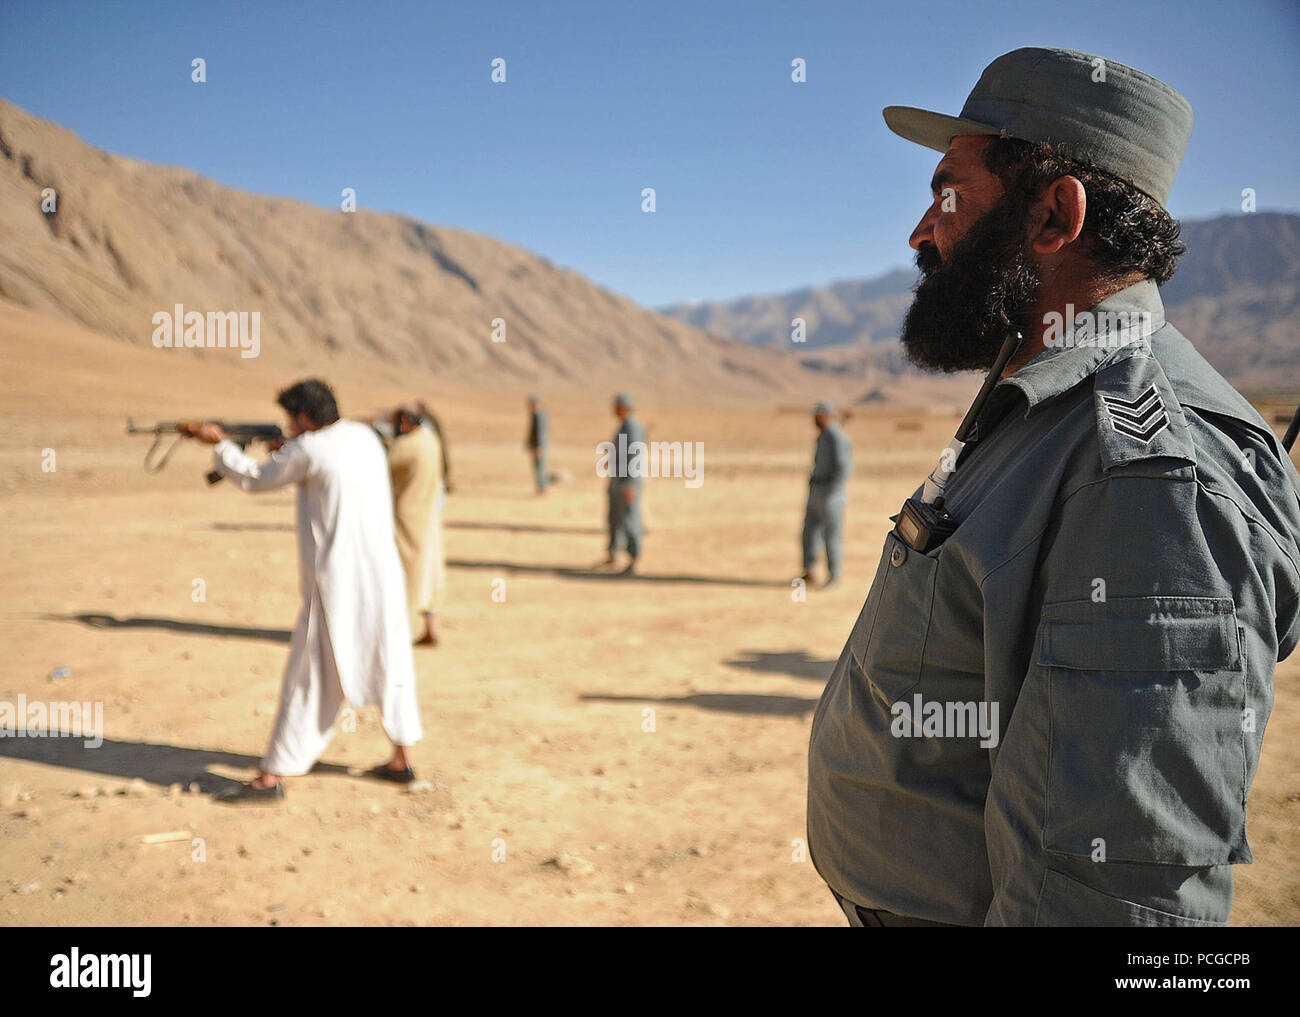 An Afghan Local Police instructor monitors ALP candidates as they fire their AK-47 rifles during weapons training in Gizab district, Uruzgan province, Afghanistan, Dec. 8. ALP provide village stability and police the area. Stock Photo